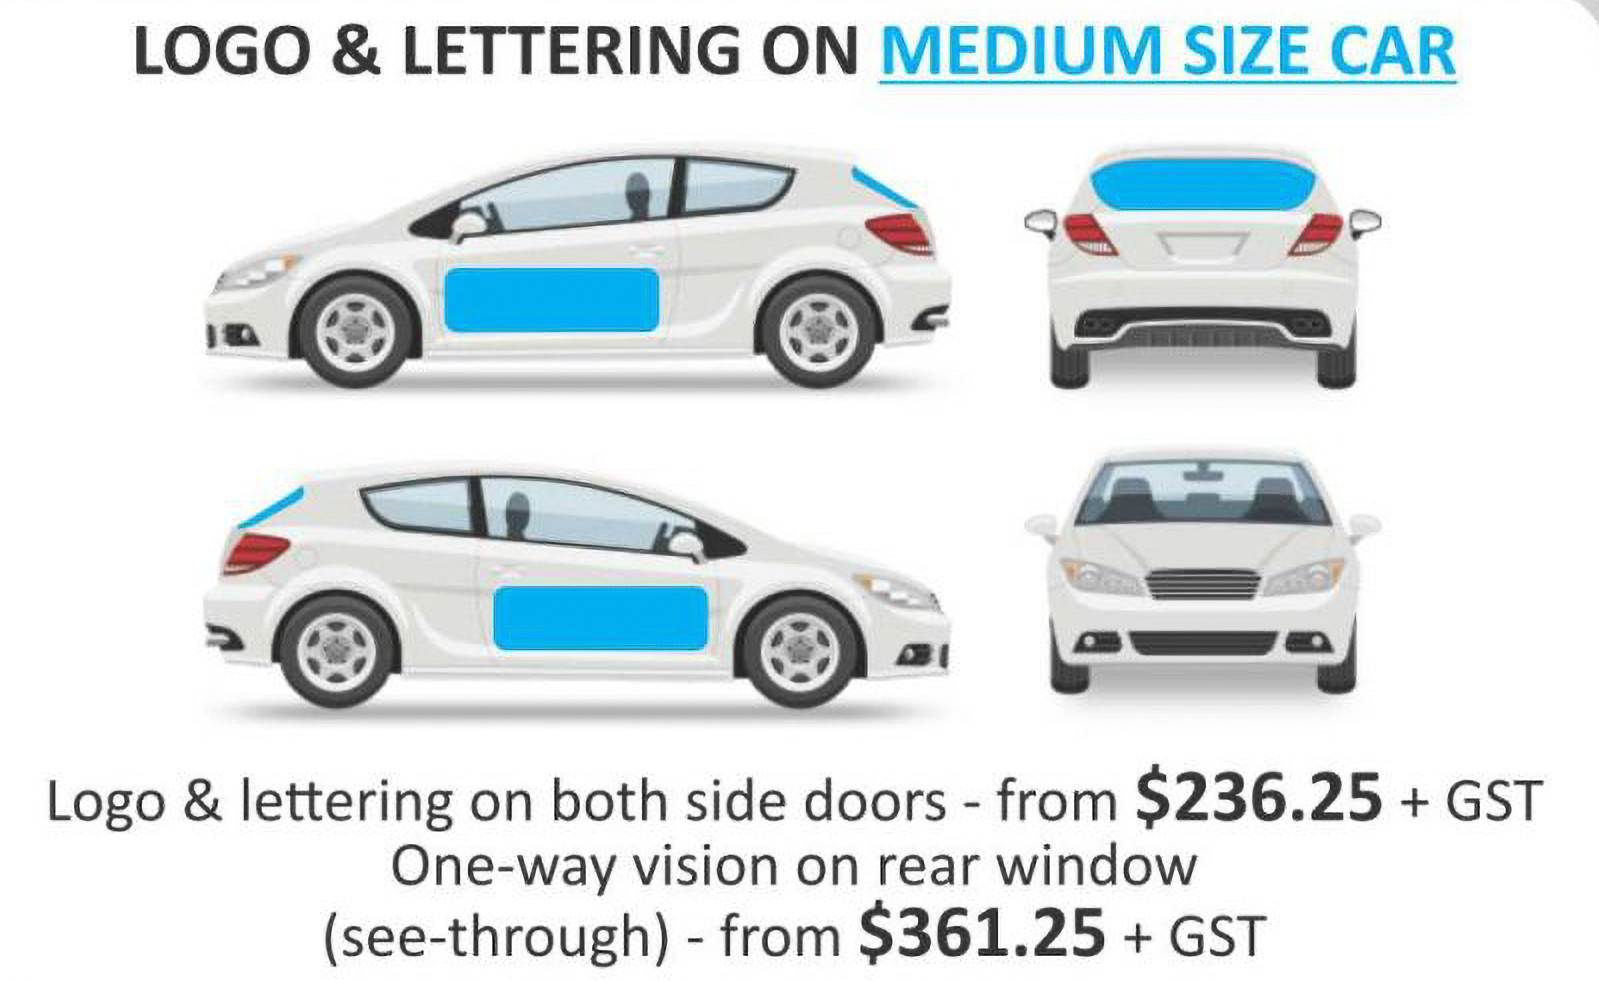 Logo and lettering vehicle signage pricing for medium car or suv in Newcastle